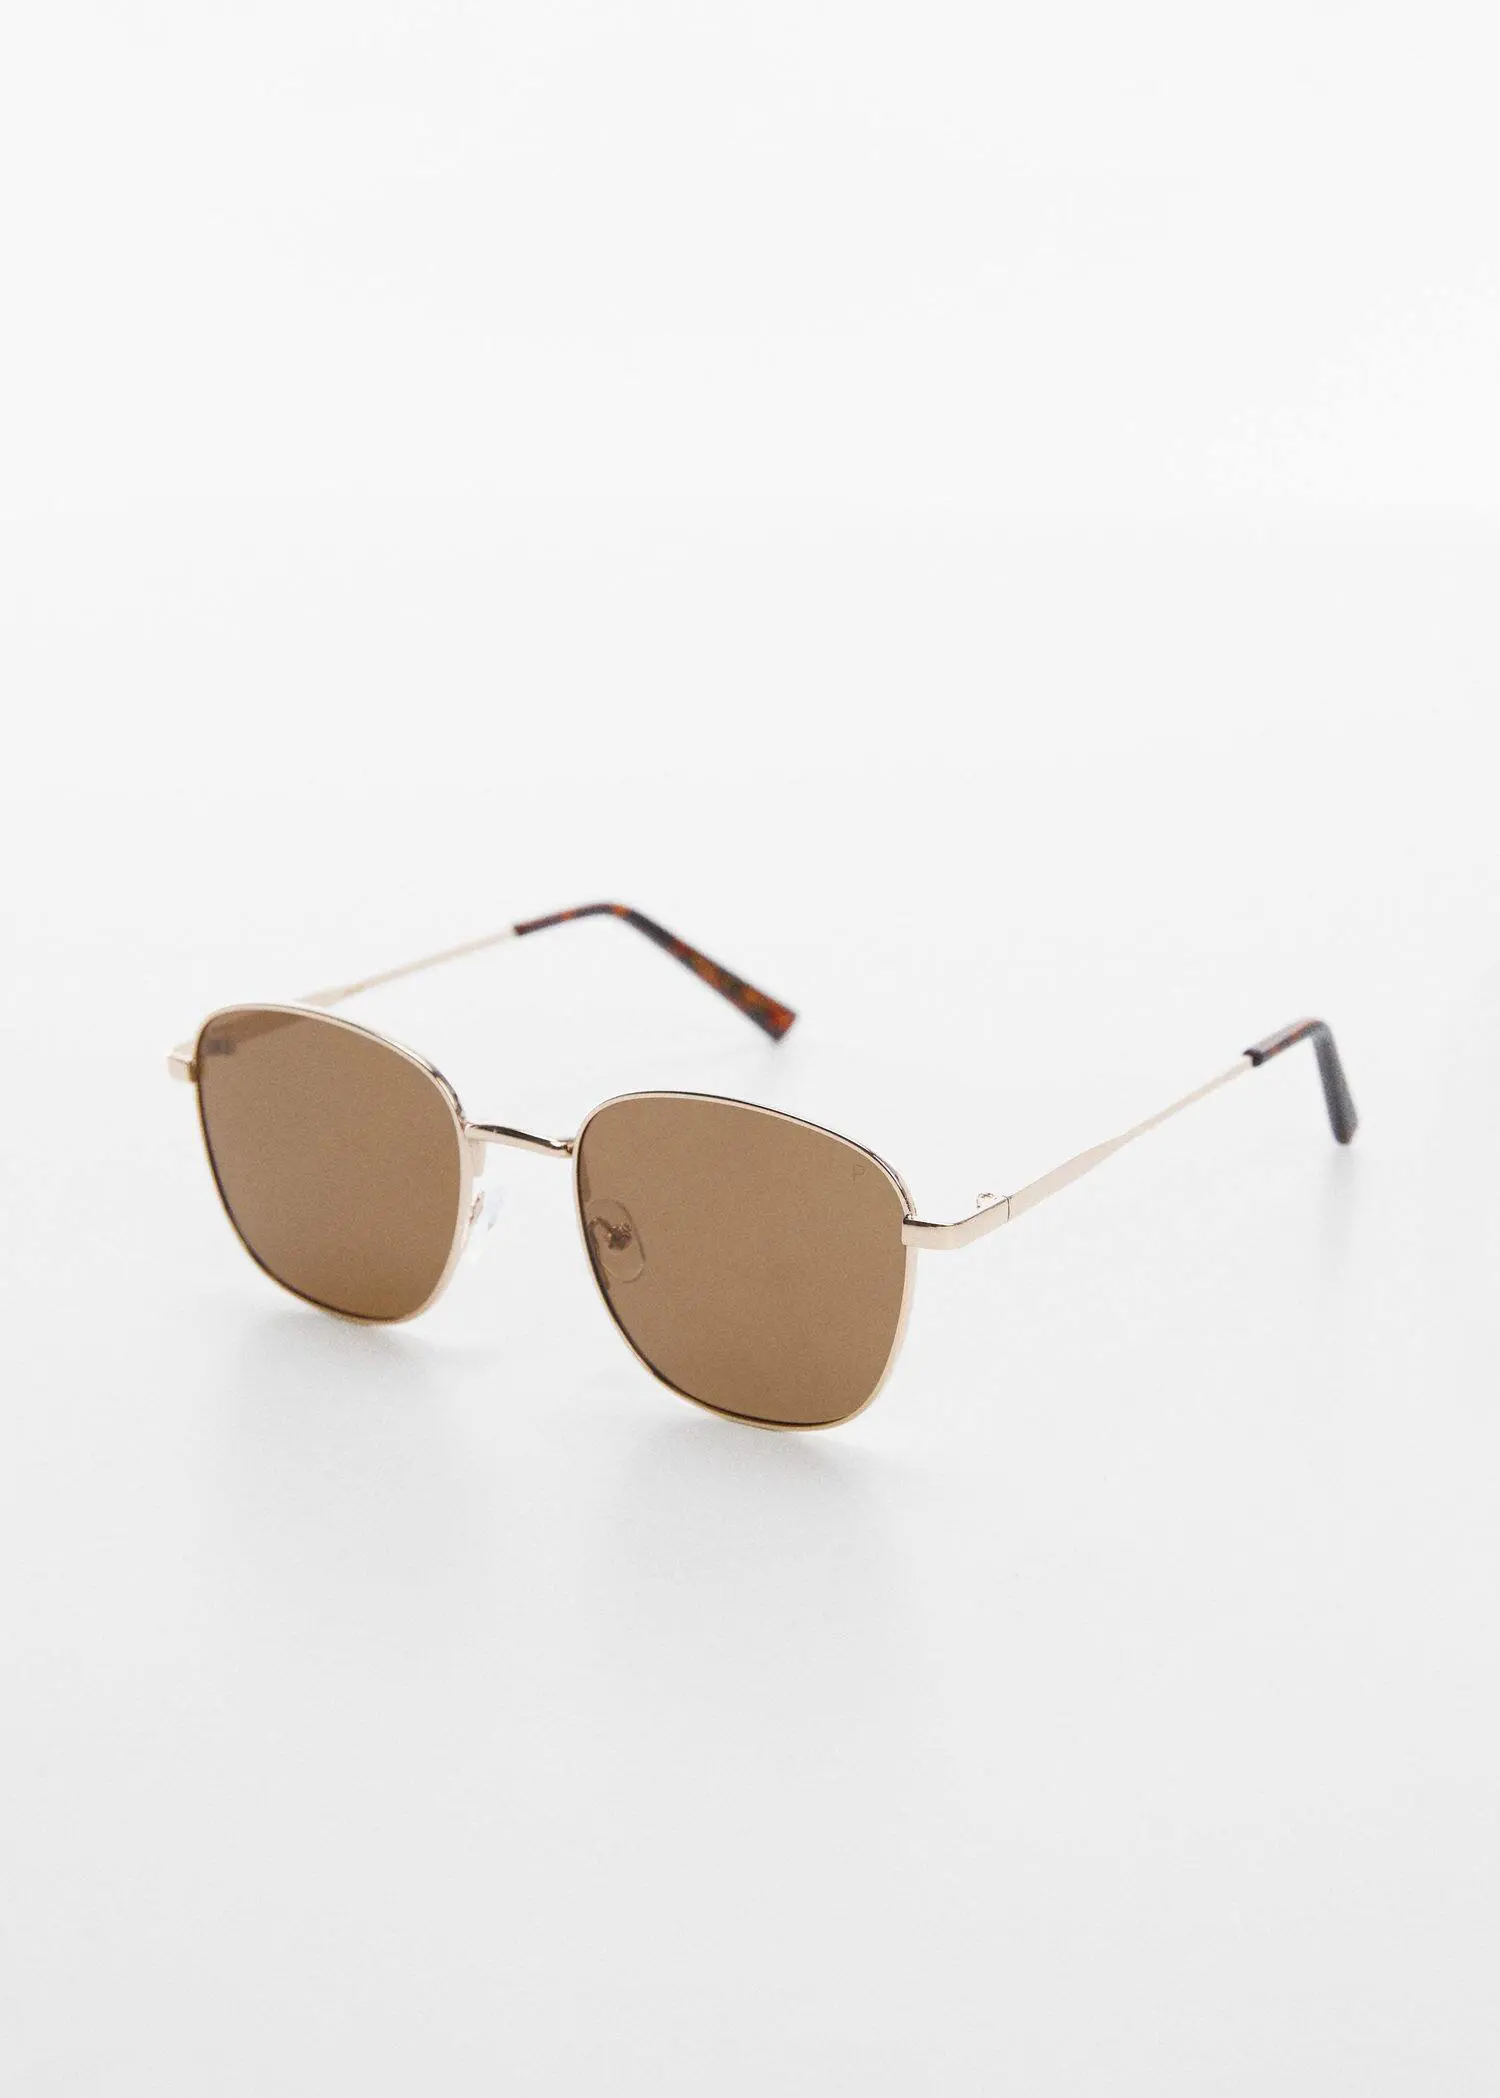 Mango Polarised sunglasses. a pair of brown sunglasses sitting on top of a table. 